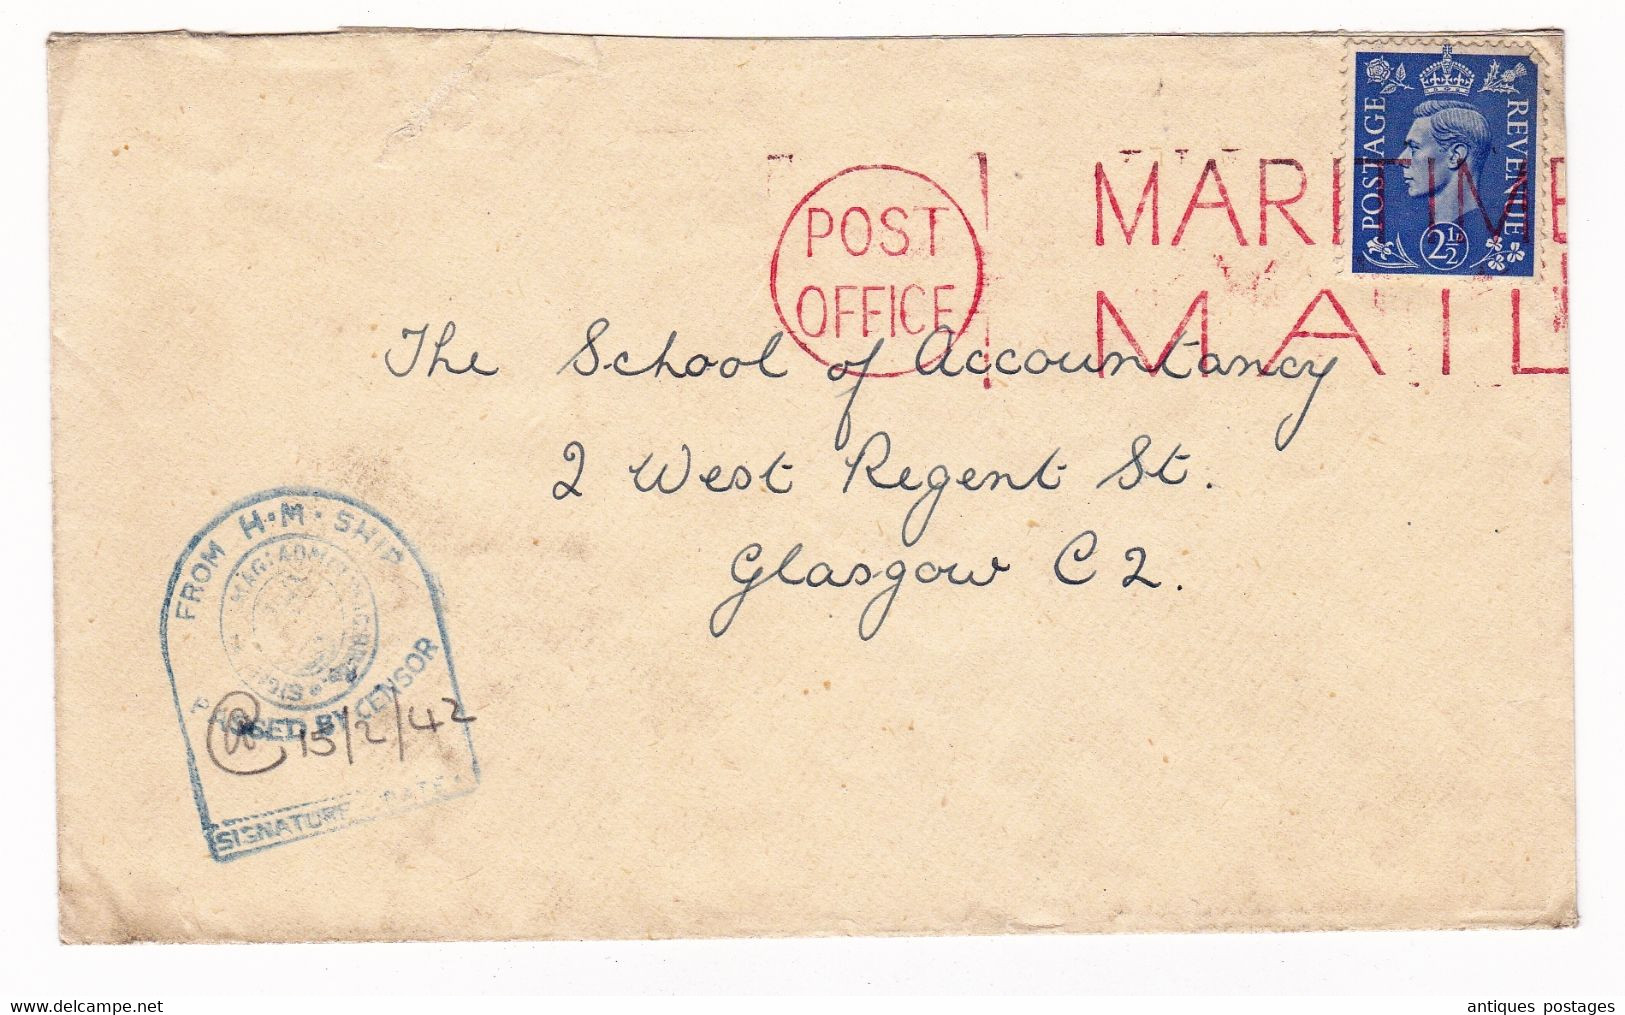 Maritime Mail 1942 England Passed By Censor From H.M. Ship WW2  Censure Militaire Seconde Guerre Mondiale - Briefe U. Dokumente